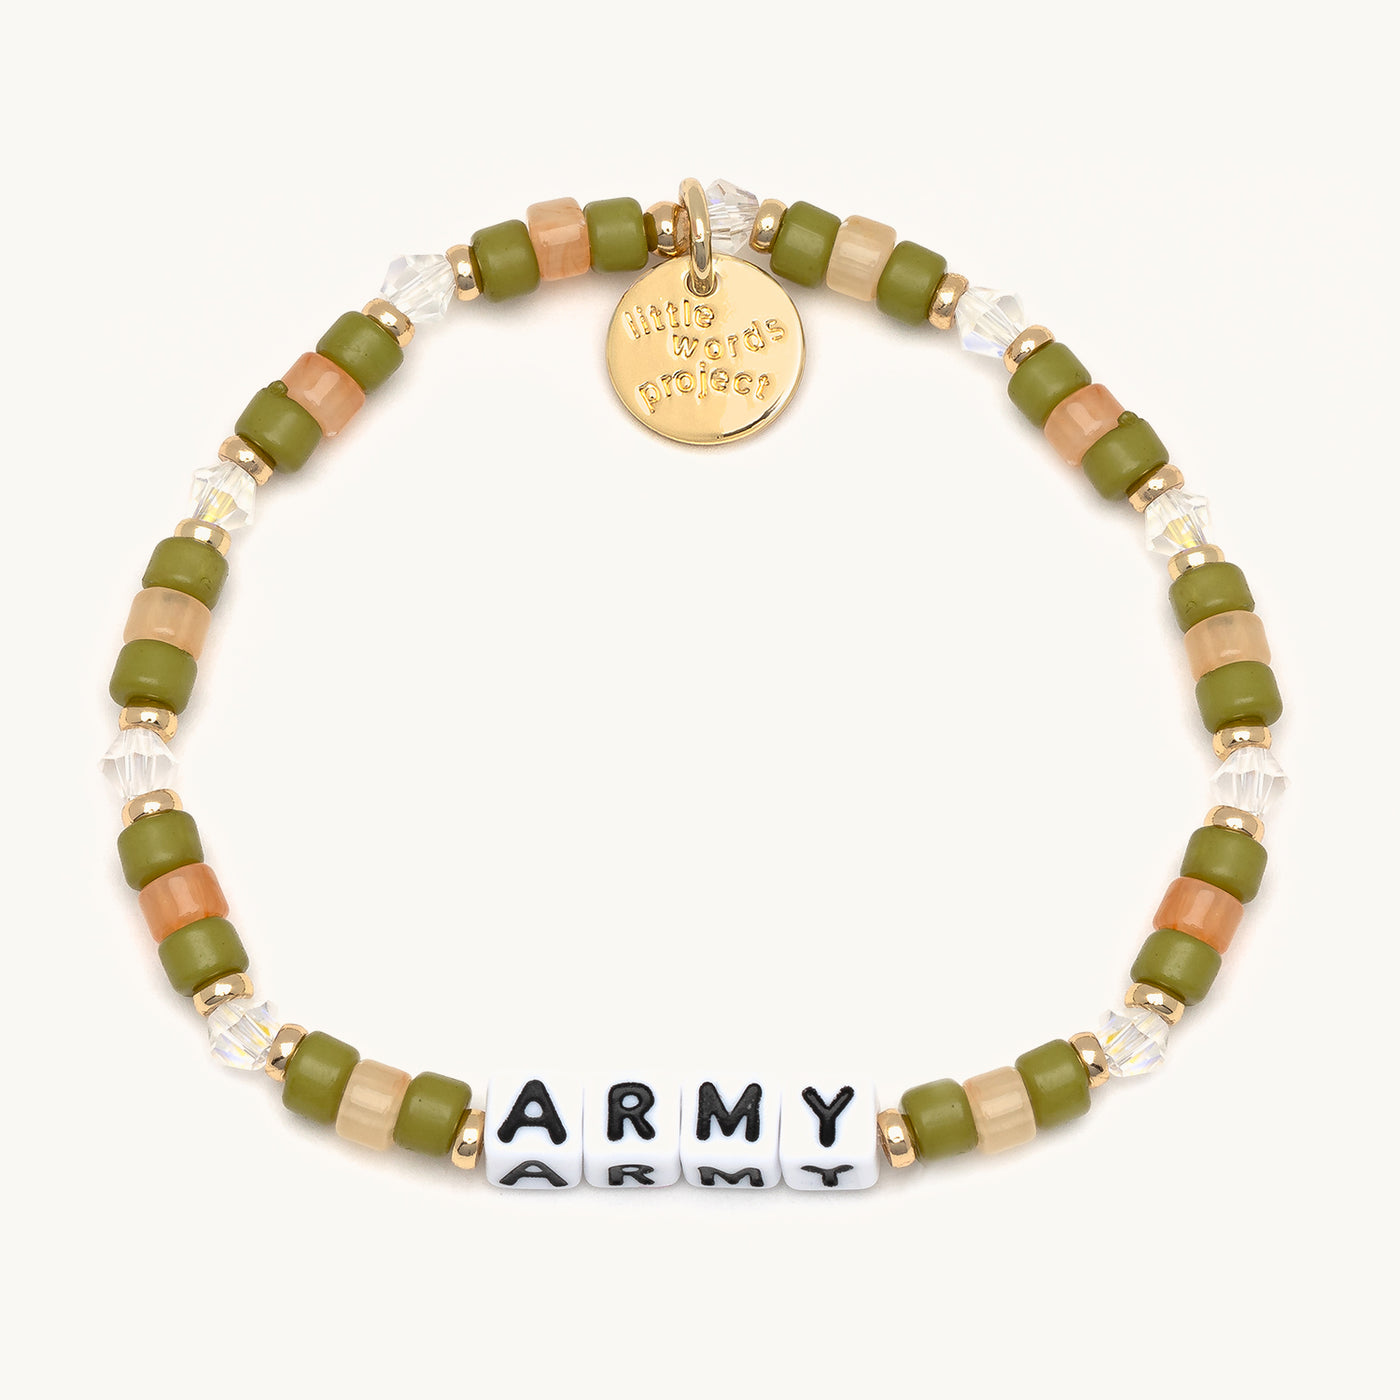 Army - Everyday Heroes Bracelet - Little Words Project®